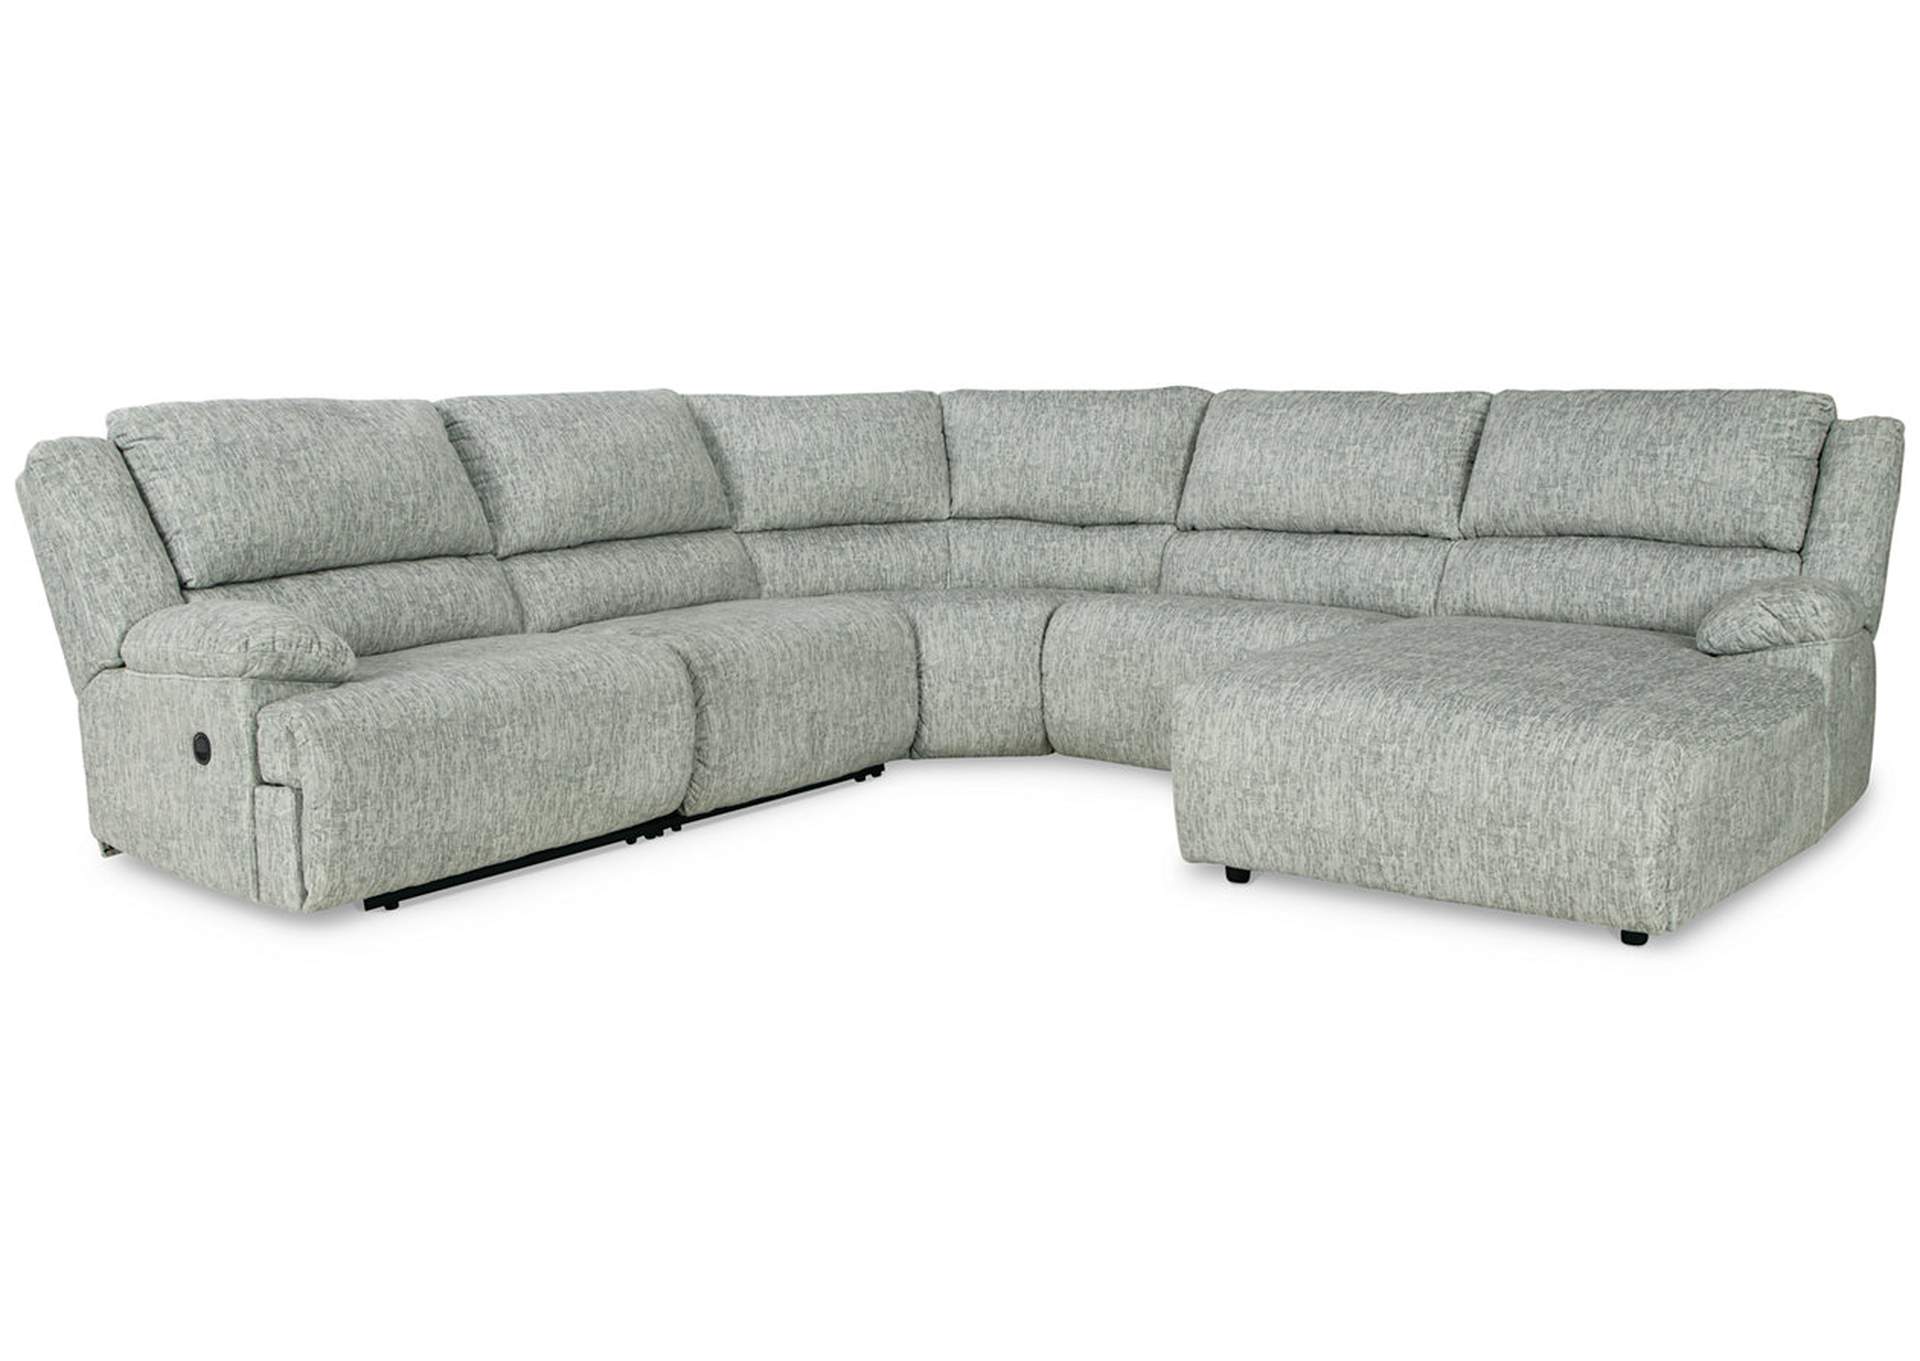 McClelland 5-Piece Reclining Sectional with Chaise,Signature Design By Ashley